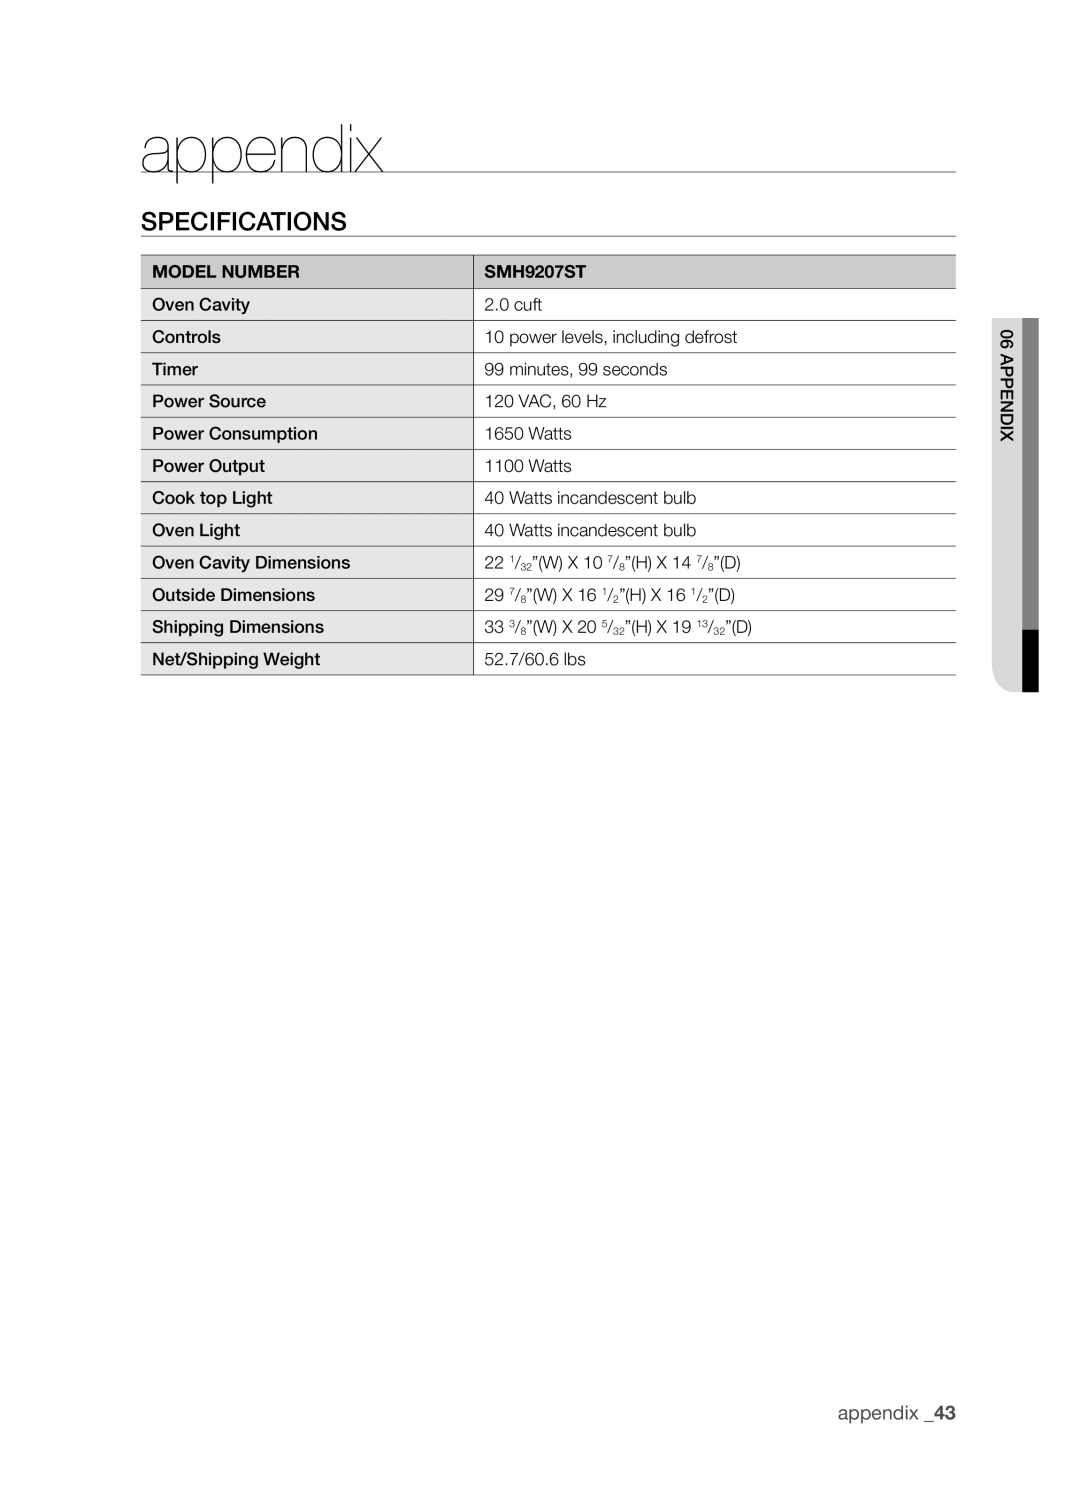 Samsung SMH9207 user manual appendix, Specifications 